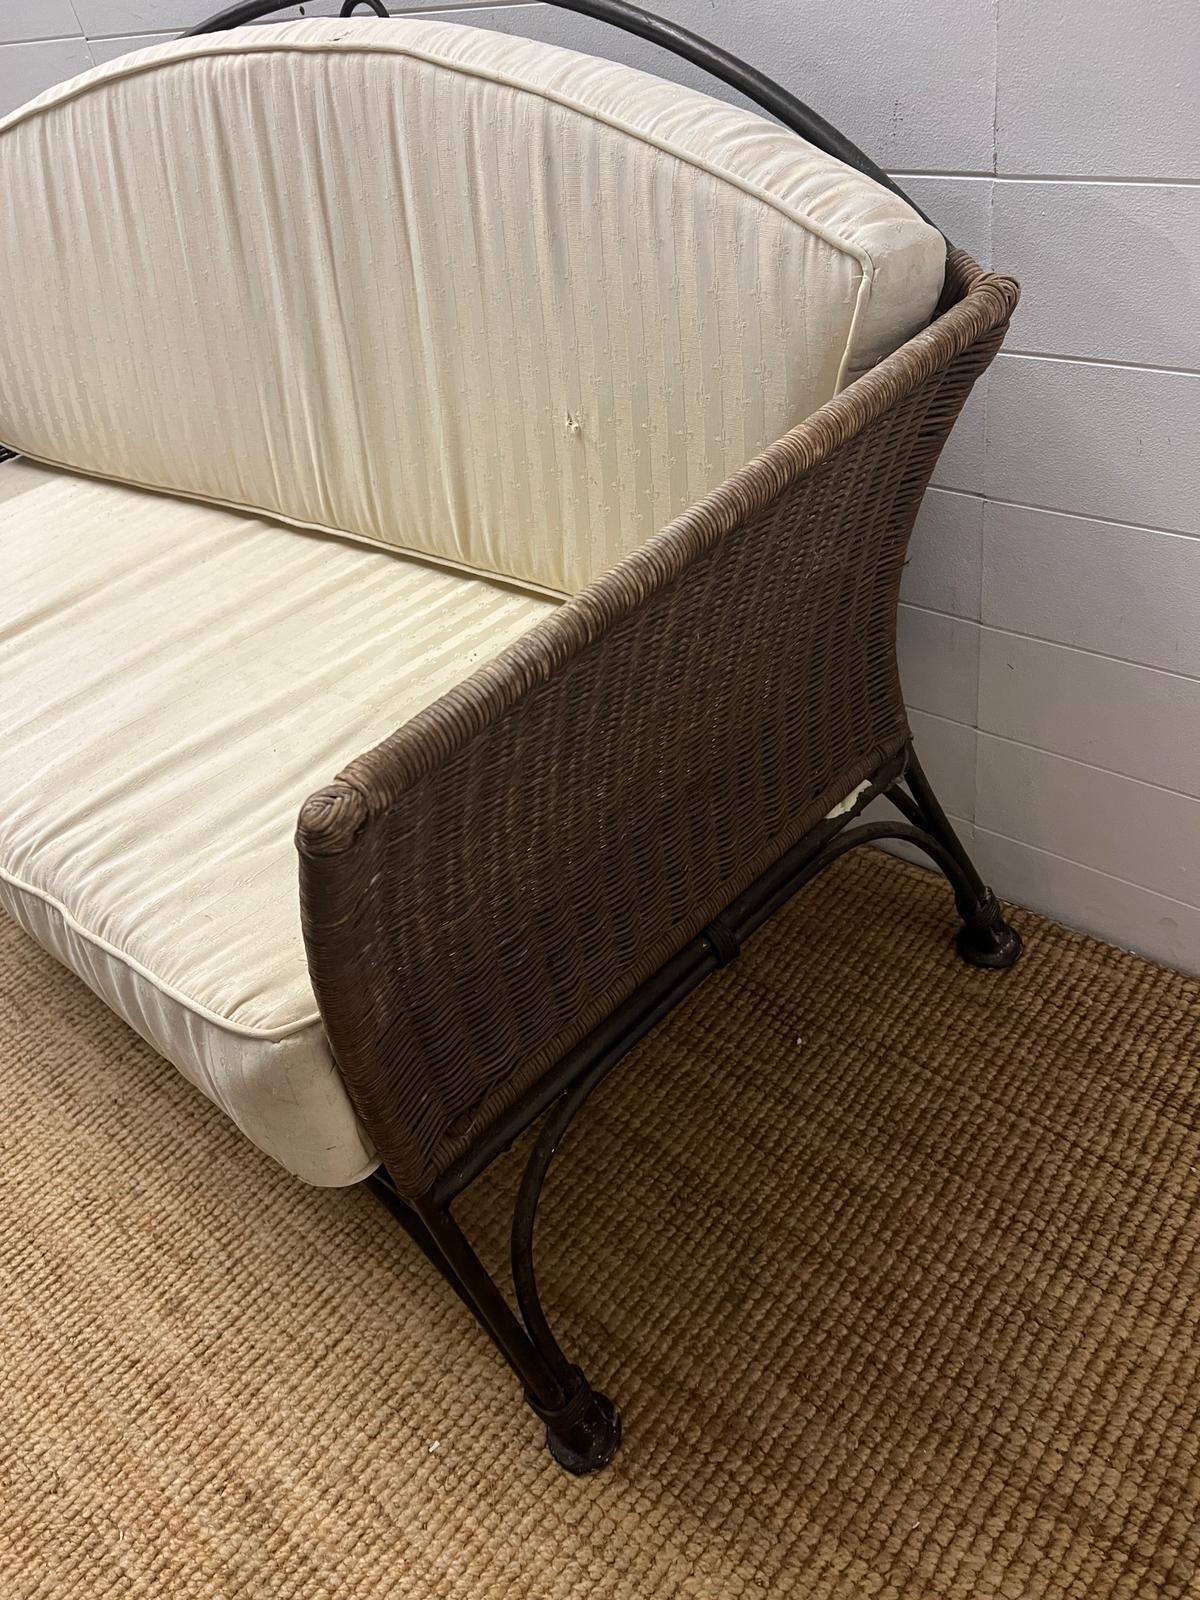 A metal rattan rustic garden suite comprising of a two seater sofa, his and her chairs, footstool - Image 5 of 26